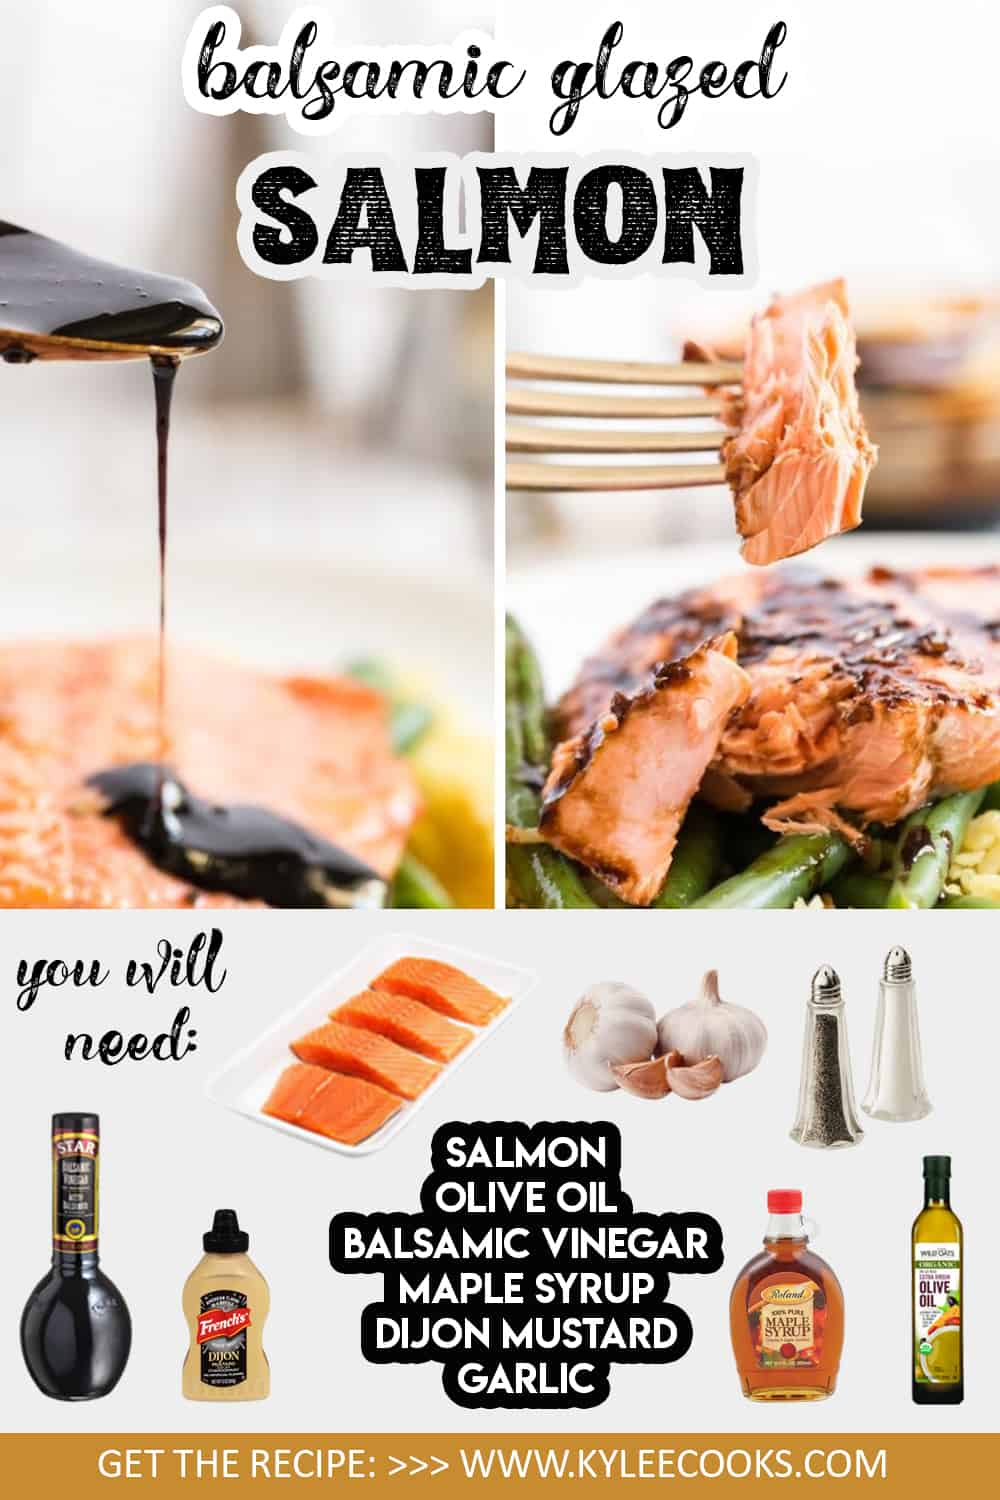 balsamic glazed salmon with the recipe ingredients in pics overlaid